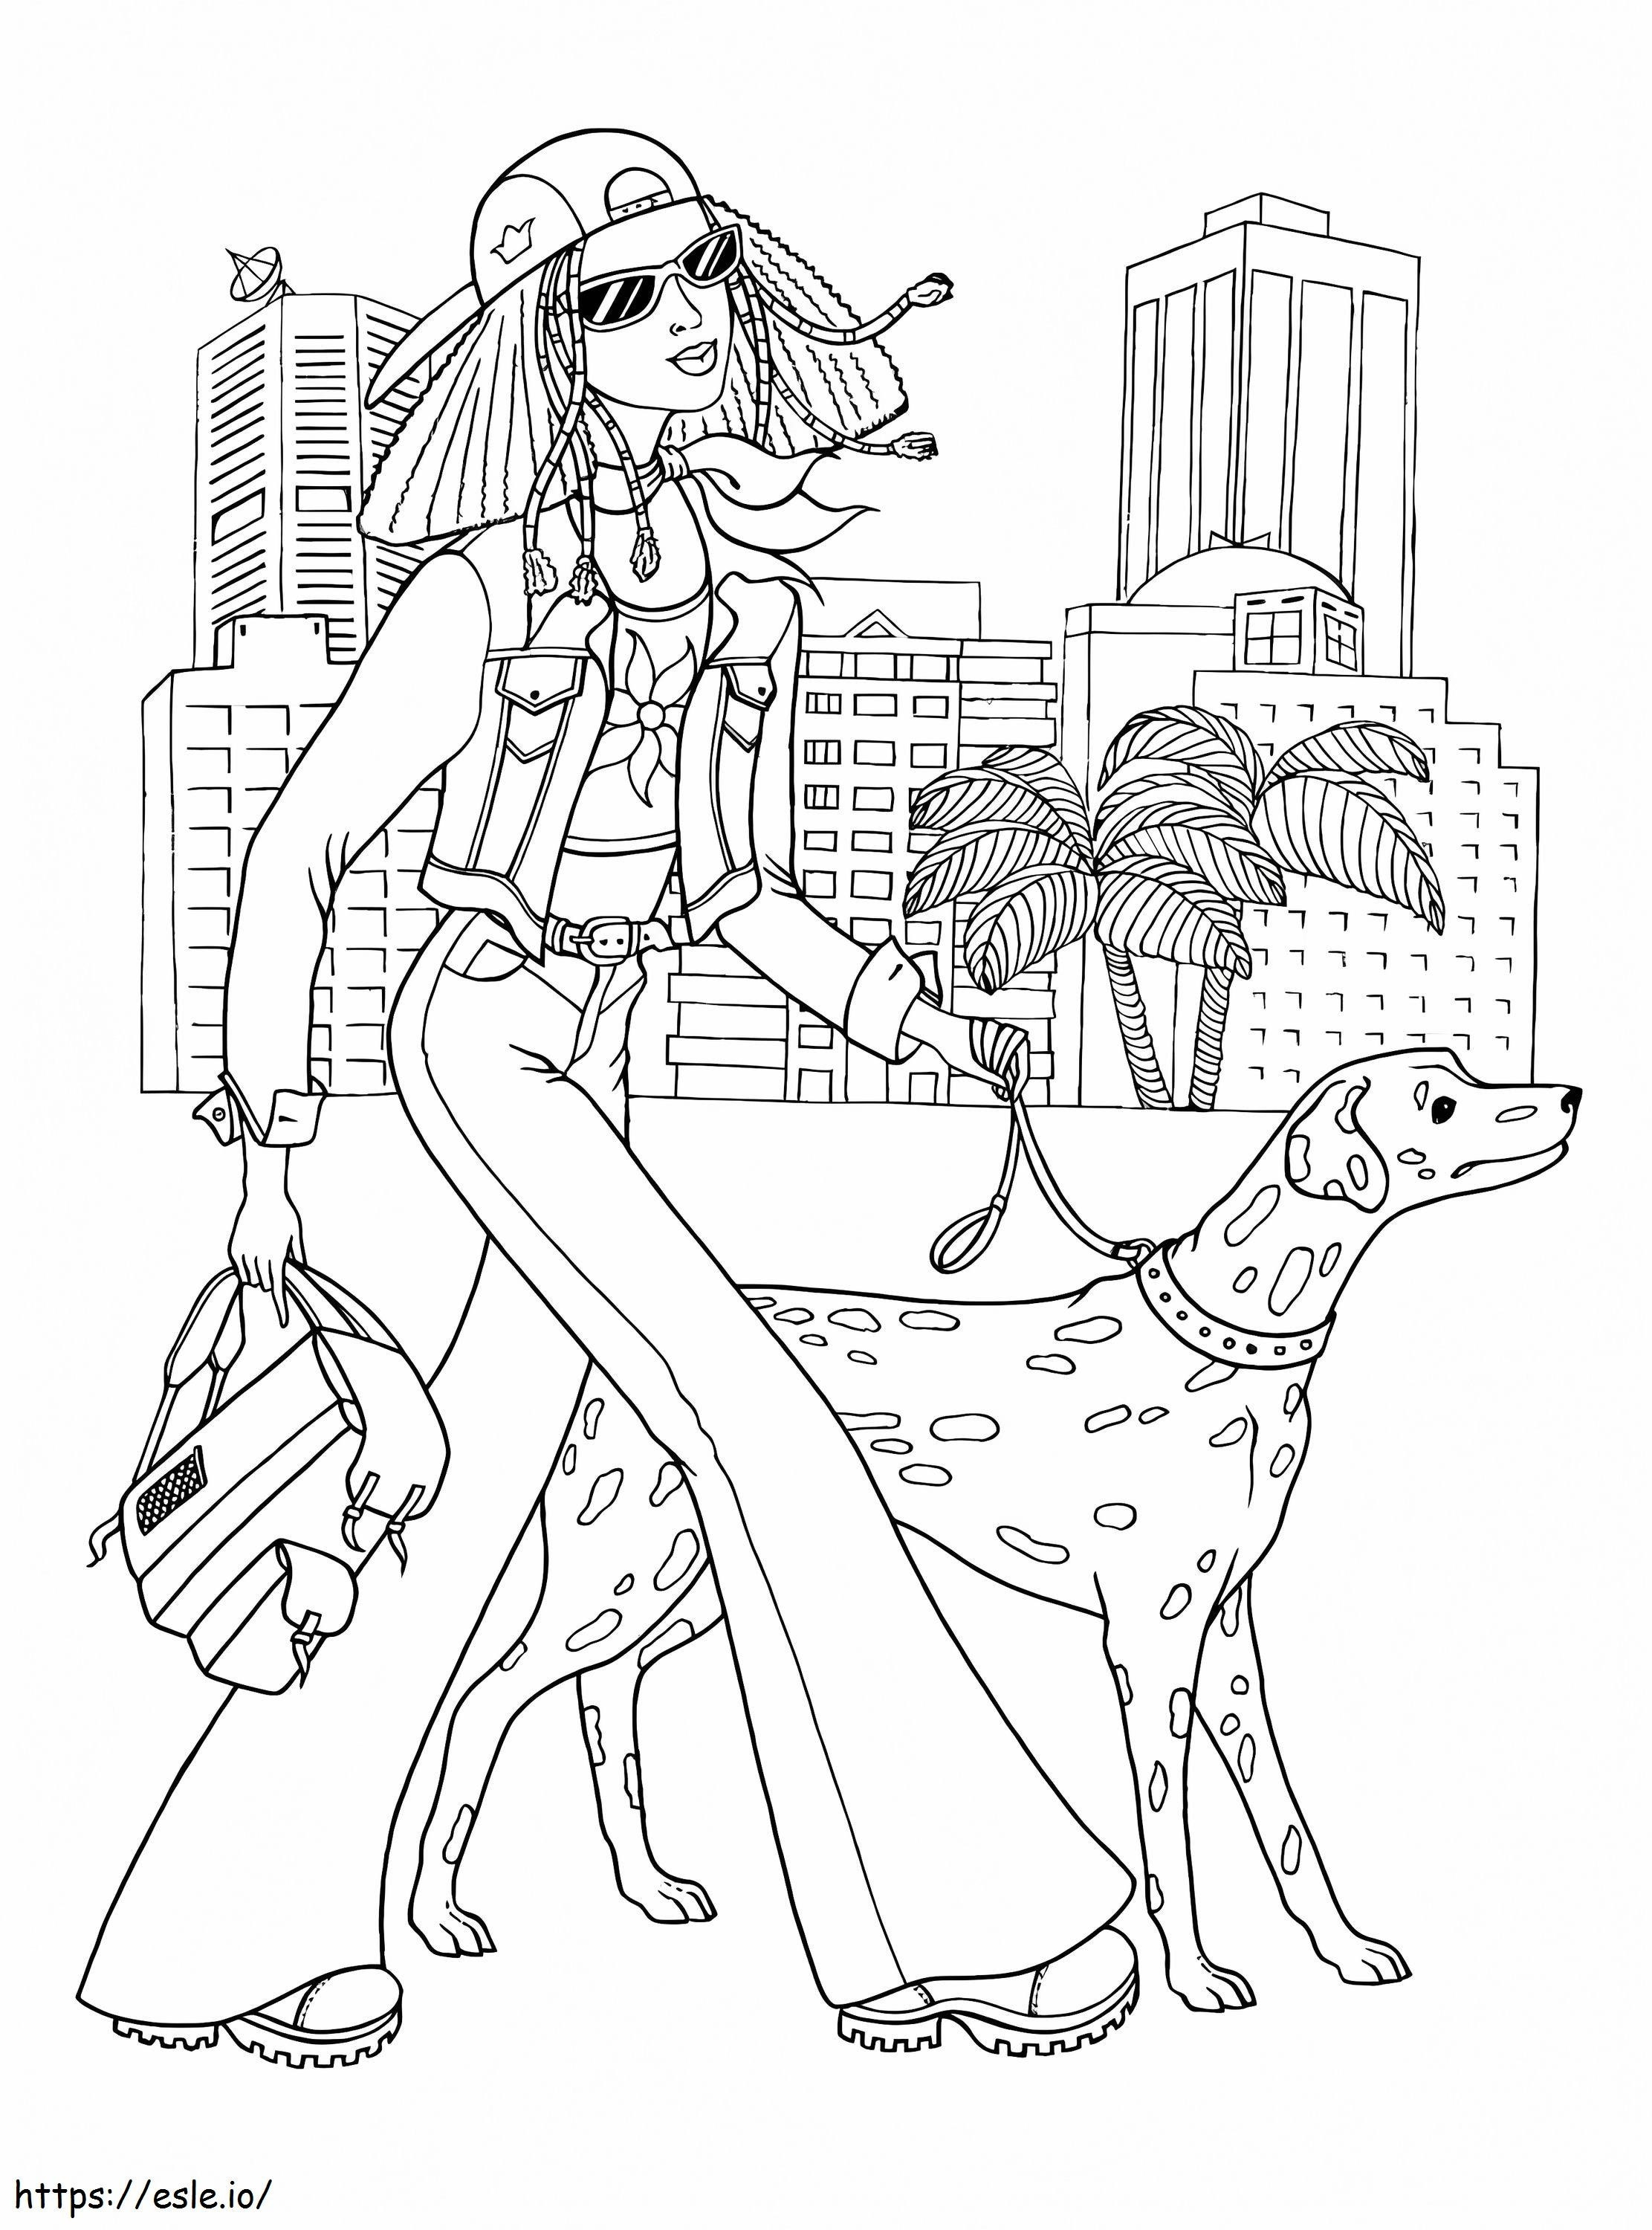 Girl With A Dalmatian coloring page